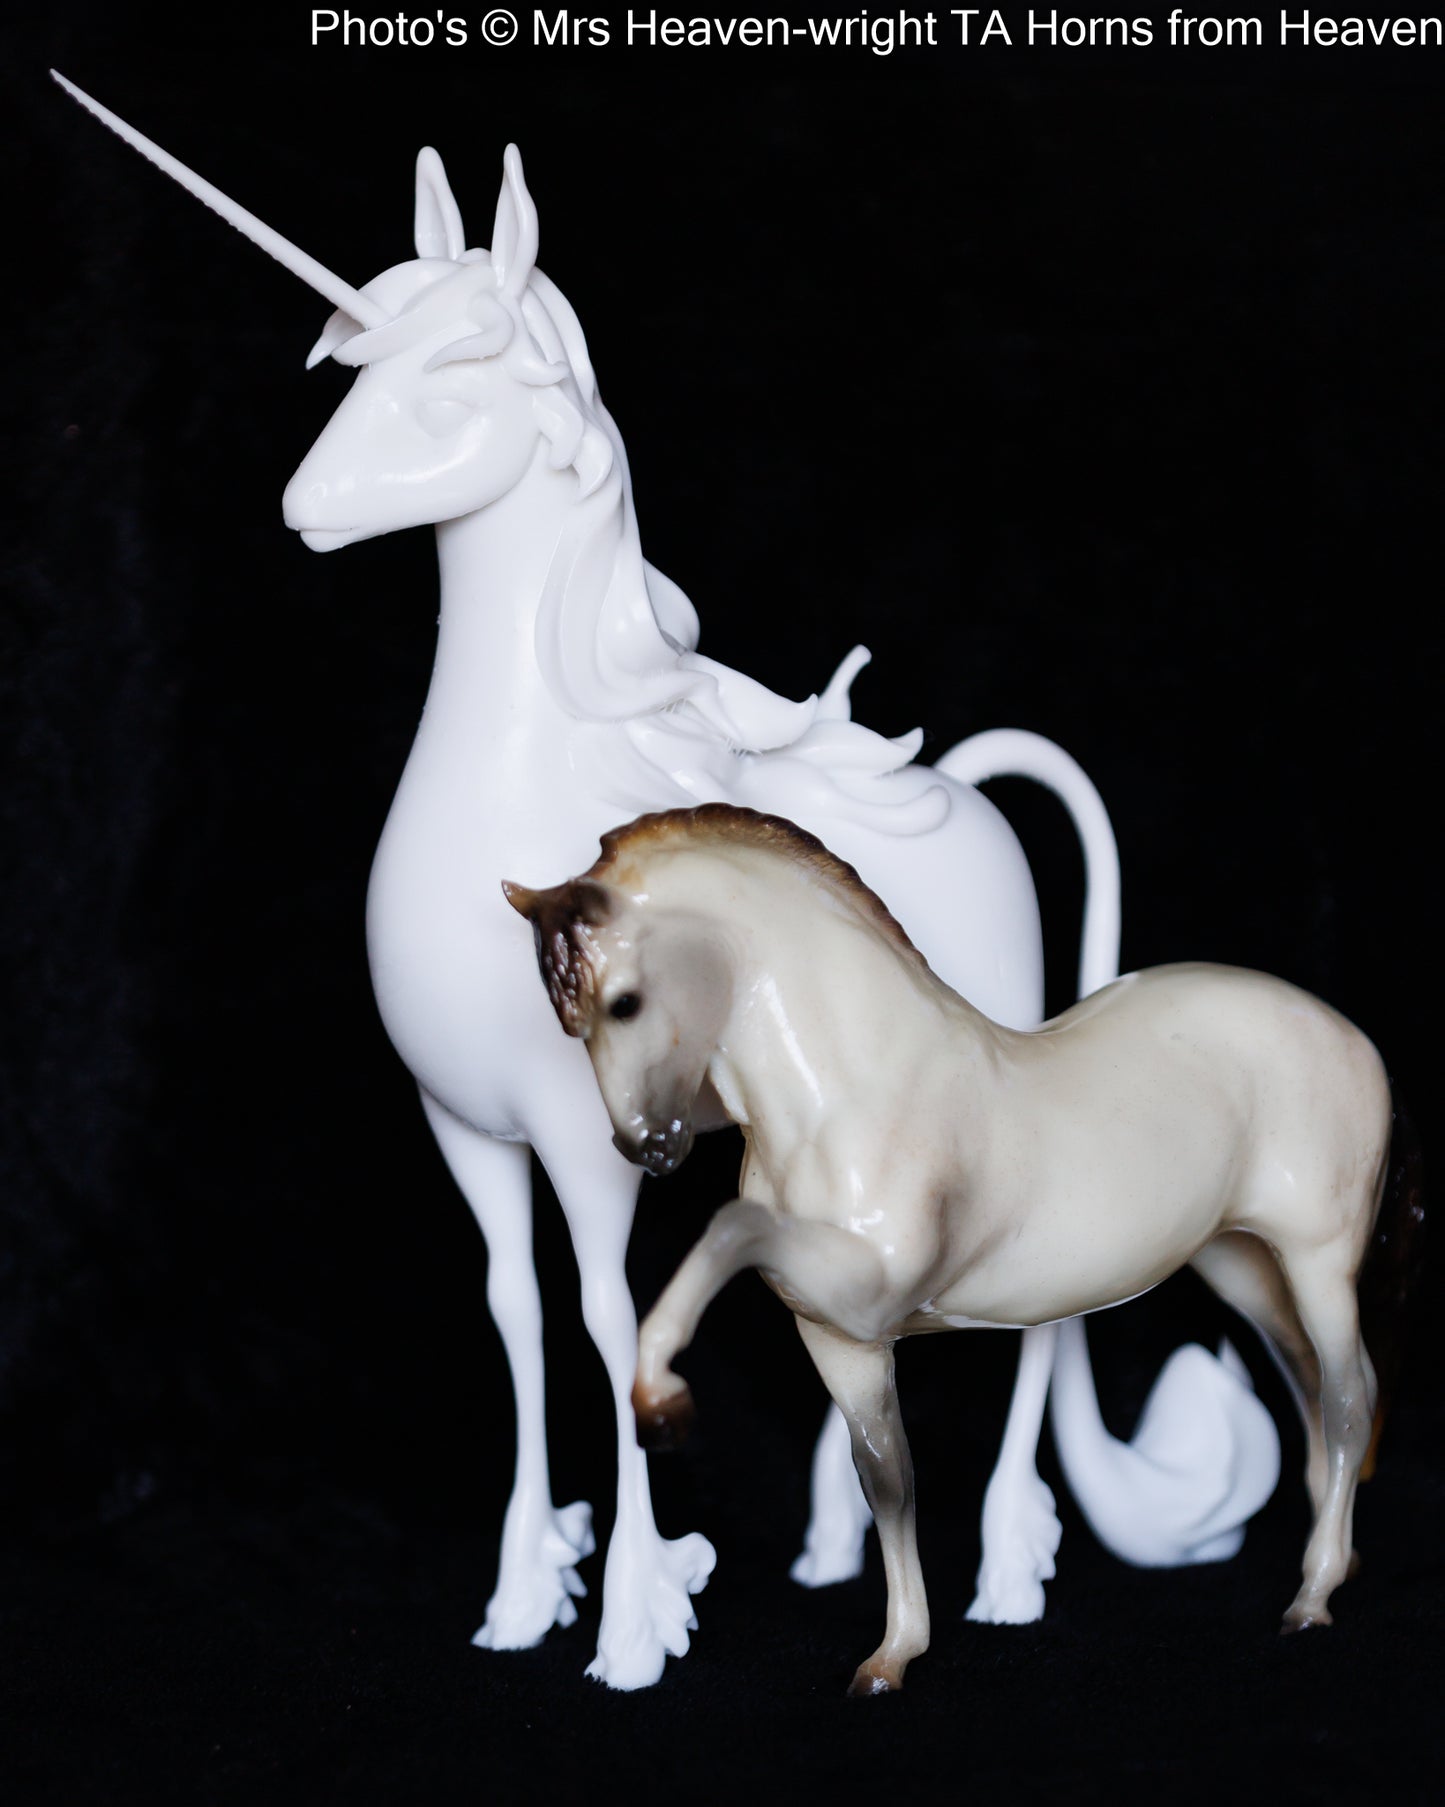 1/6 scale 15" The last unicorn figurine - white resin - ready to prep / paint - LTD TO 5